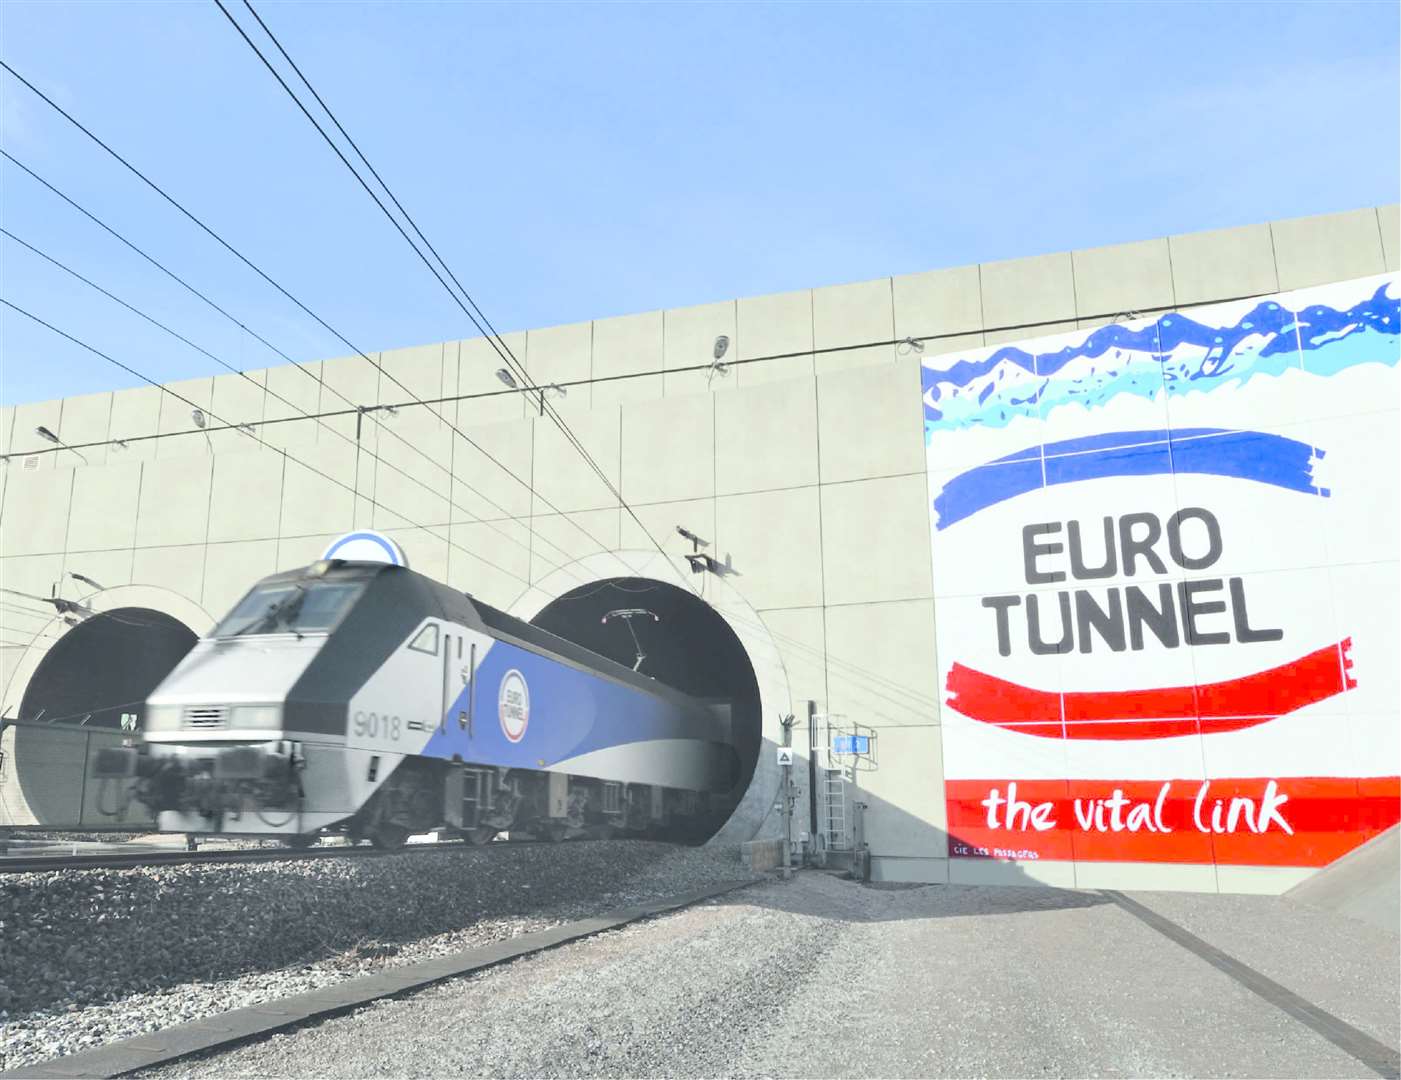 Eurotunnel has been left counting the cost of 2020's travel restrictions - which, so far at least, have continued into 2021